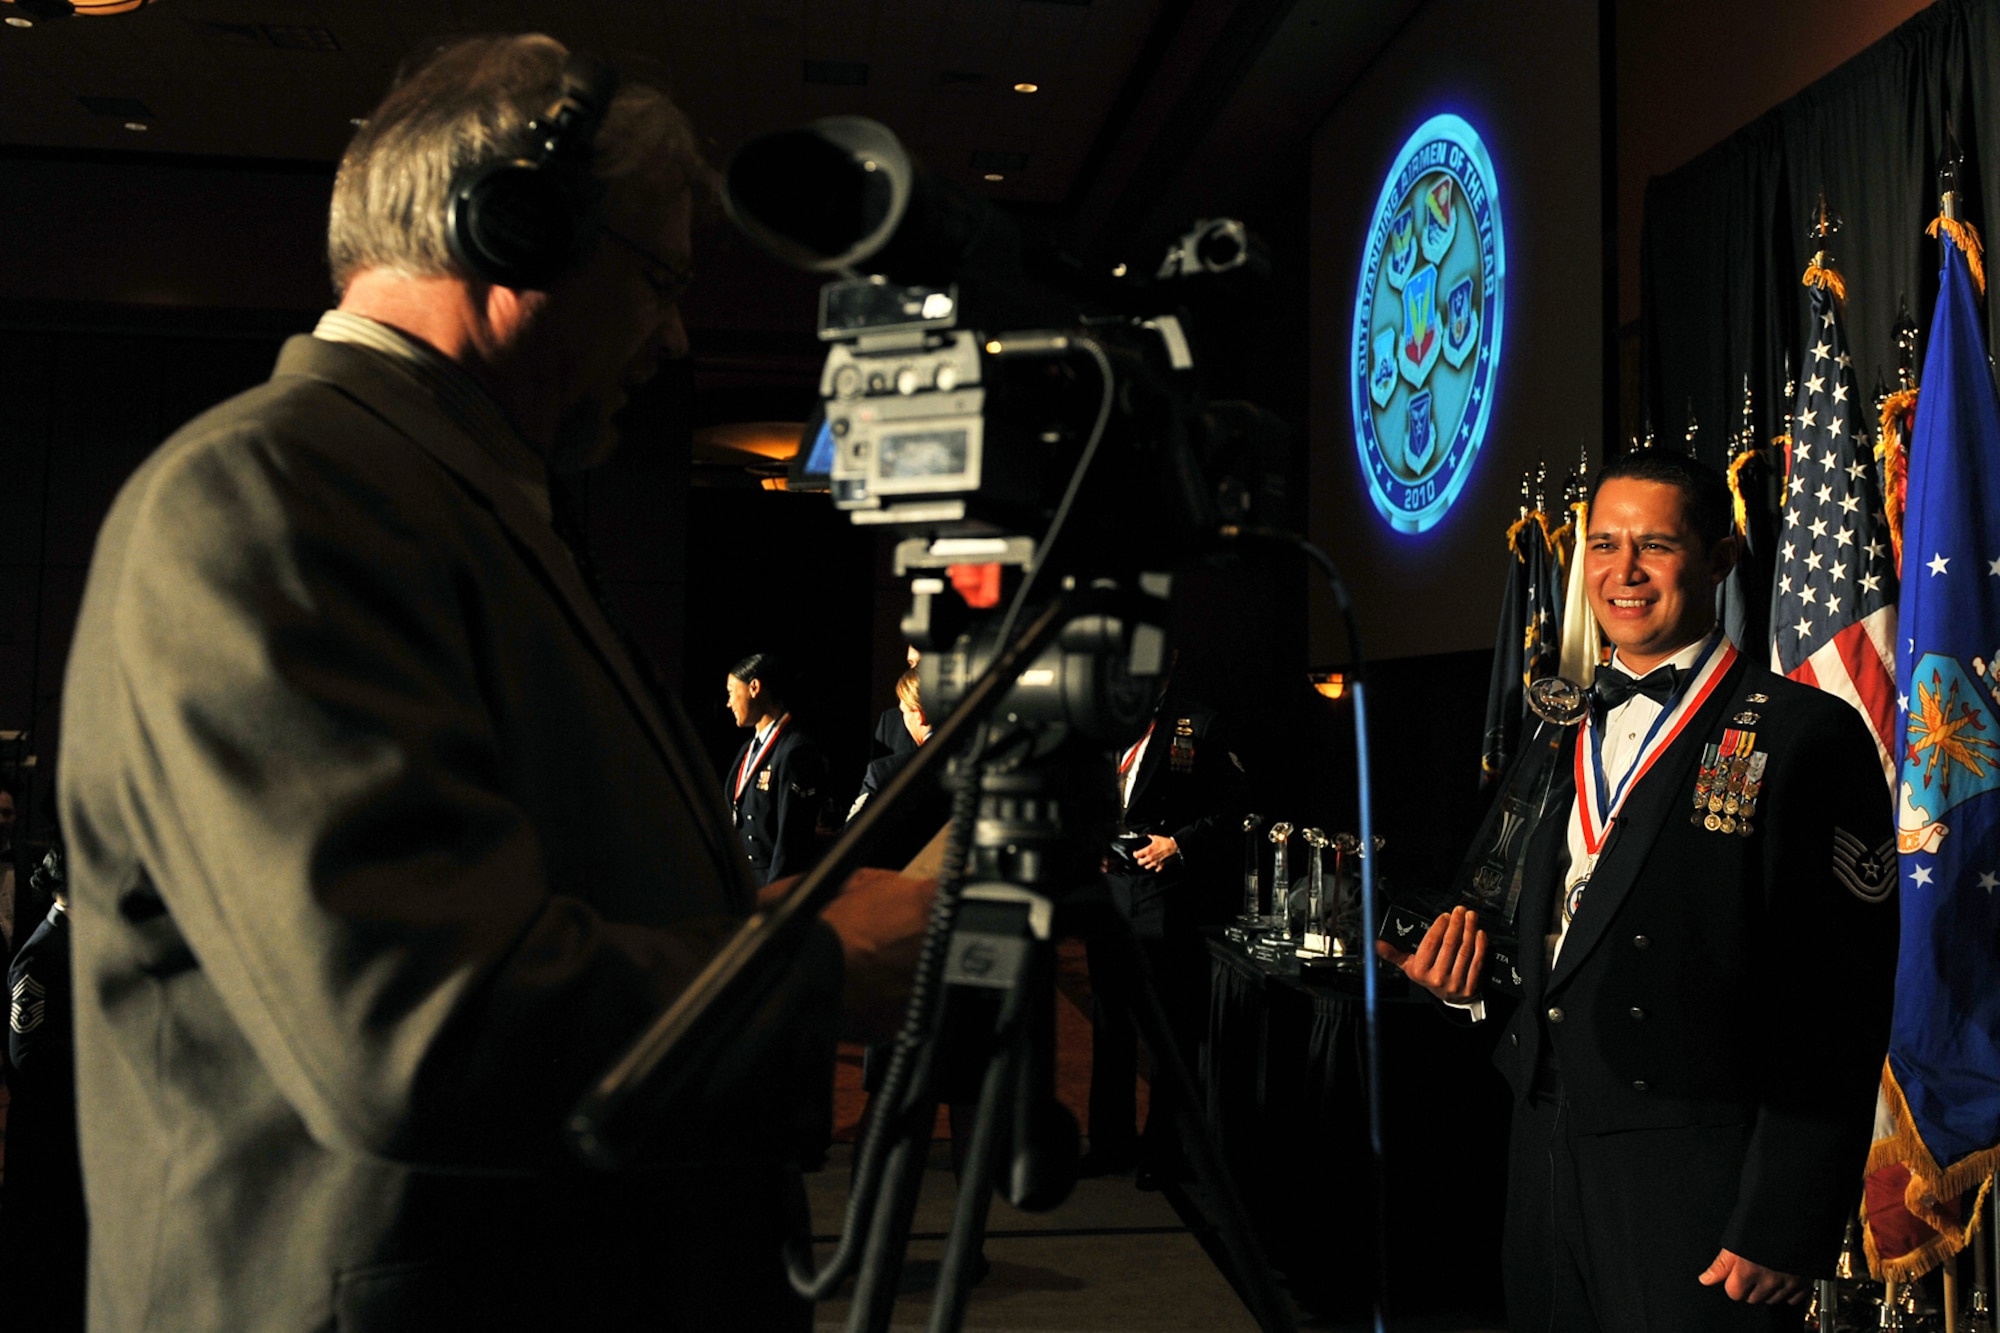 OFFUTT AIR FORCE BASE, Neb. -- Kevin Schwandt, an audio visual technician with the 55th Wing Public Affairs Office, interviews Tech. Sgt. Darrell Demotta, from Kirtland AFB, N.M., after he won Air Combat Command's Outstanding Non-commission Officer of the Year Award during ACC's Outstanding Airmen of the Year banquet at the Embassy Suites hotel in La Vista, Neb., April 21. More than 200 people attended the ceremony to honor the command's best Airmen for their dedication, sacrifice and service. U.S. Air Force photo by Charles Haymond
